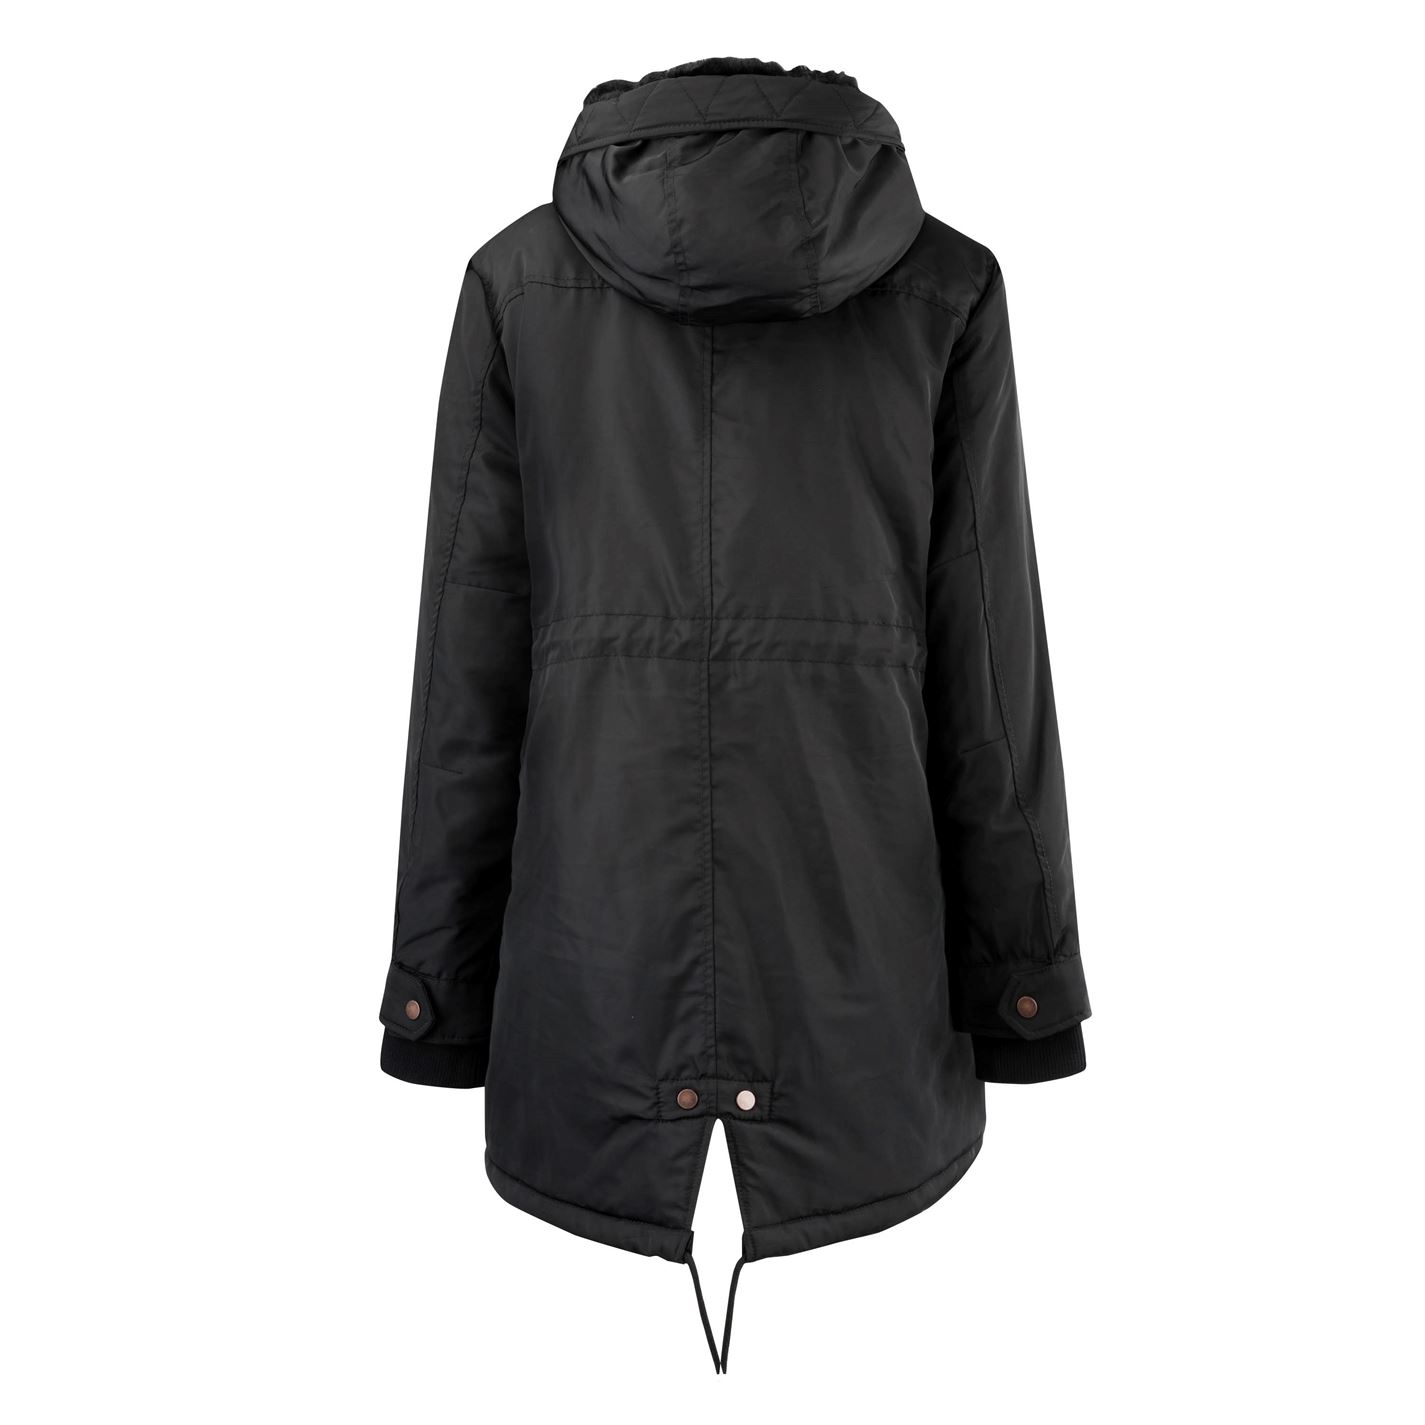 SoulCal Classic Parka Coat Ladies Jacket Top Hooded Zip Zipped Warm ...